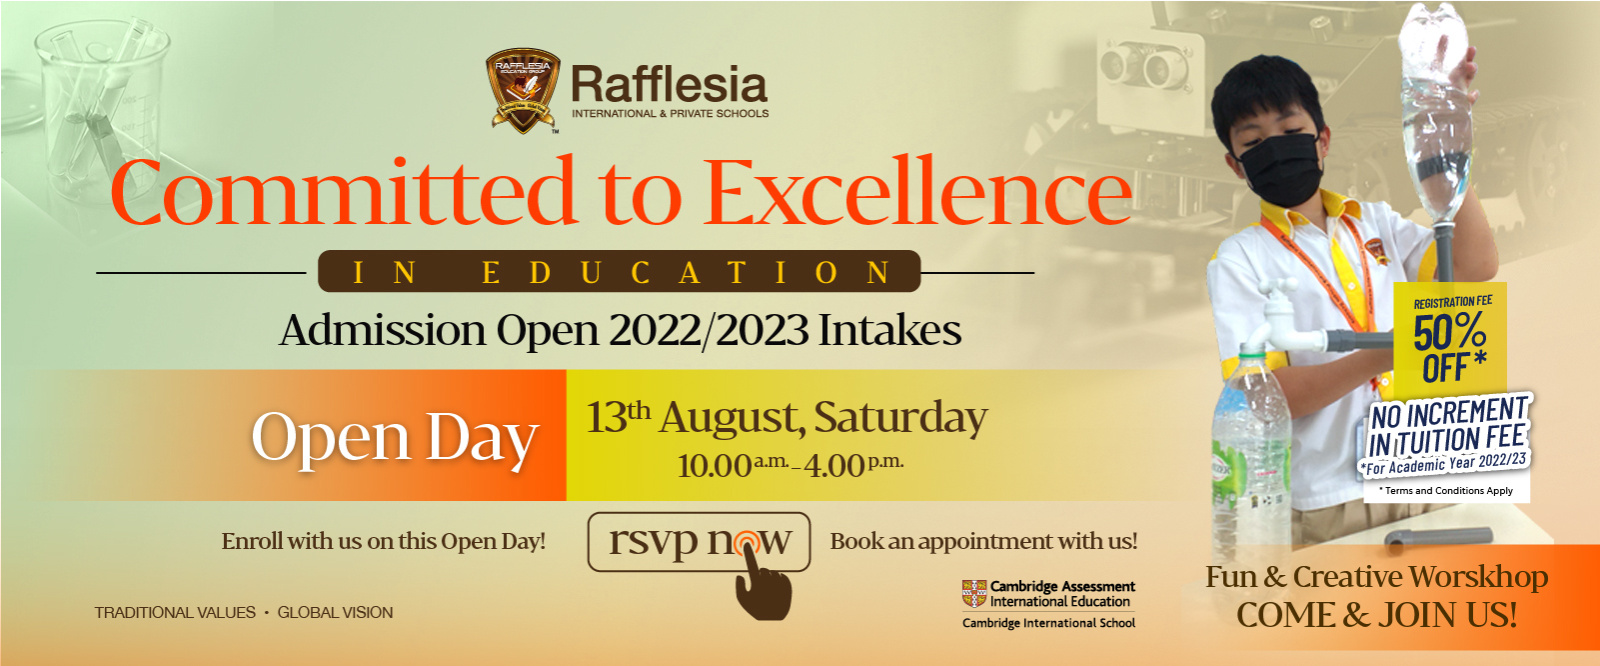  Open Day 13 August 2022